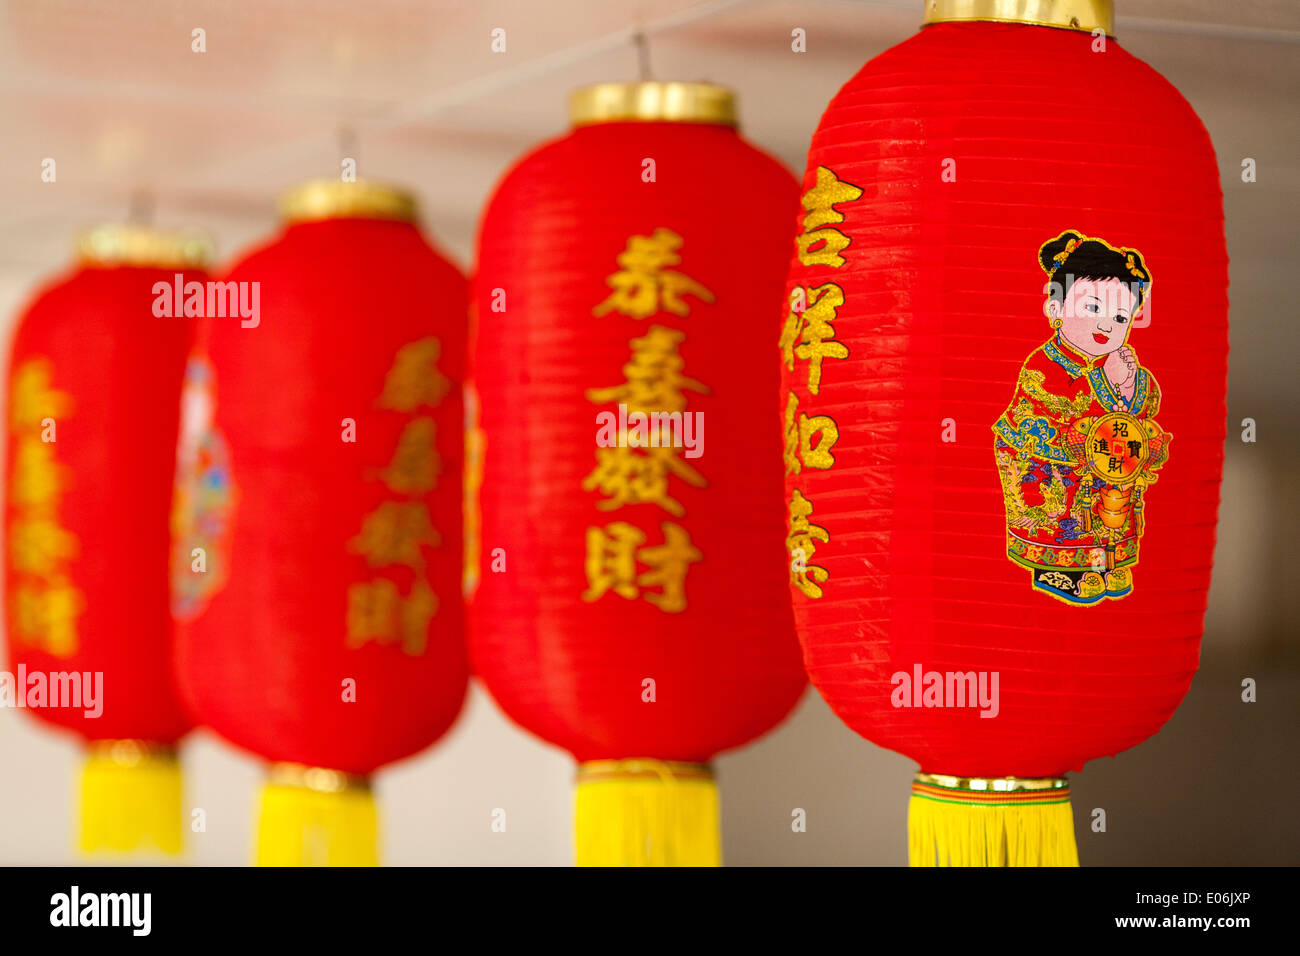 Typical generic chinese lanterns found in chinese restaurants all over the world. They are red with yellow tassels Stock Photo